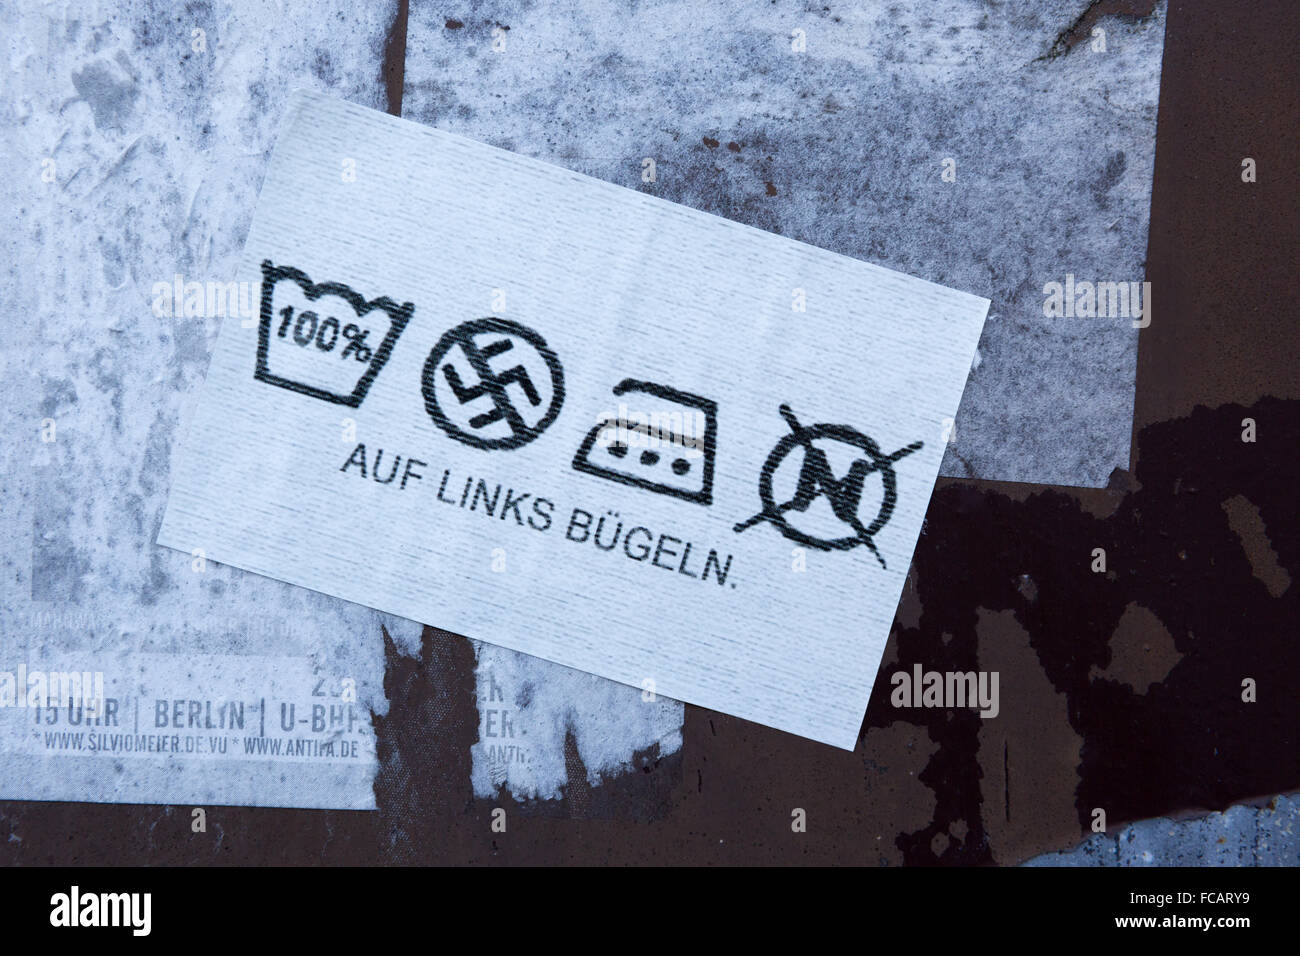 An anti-Nazi sticker on a wall in Germany in the style of a washing instructions clothing label Stock Photo